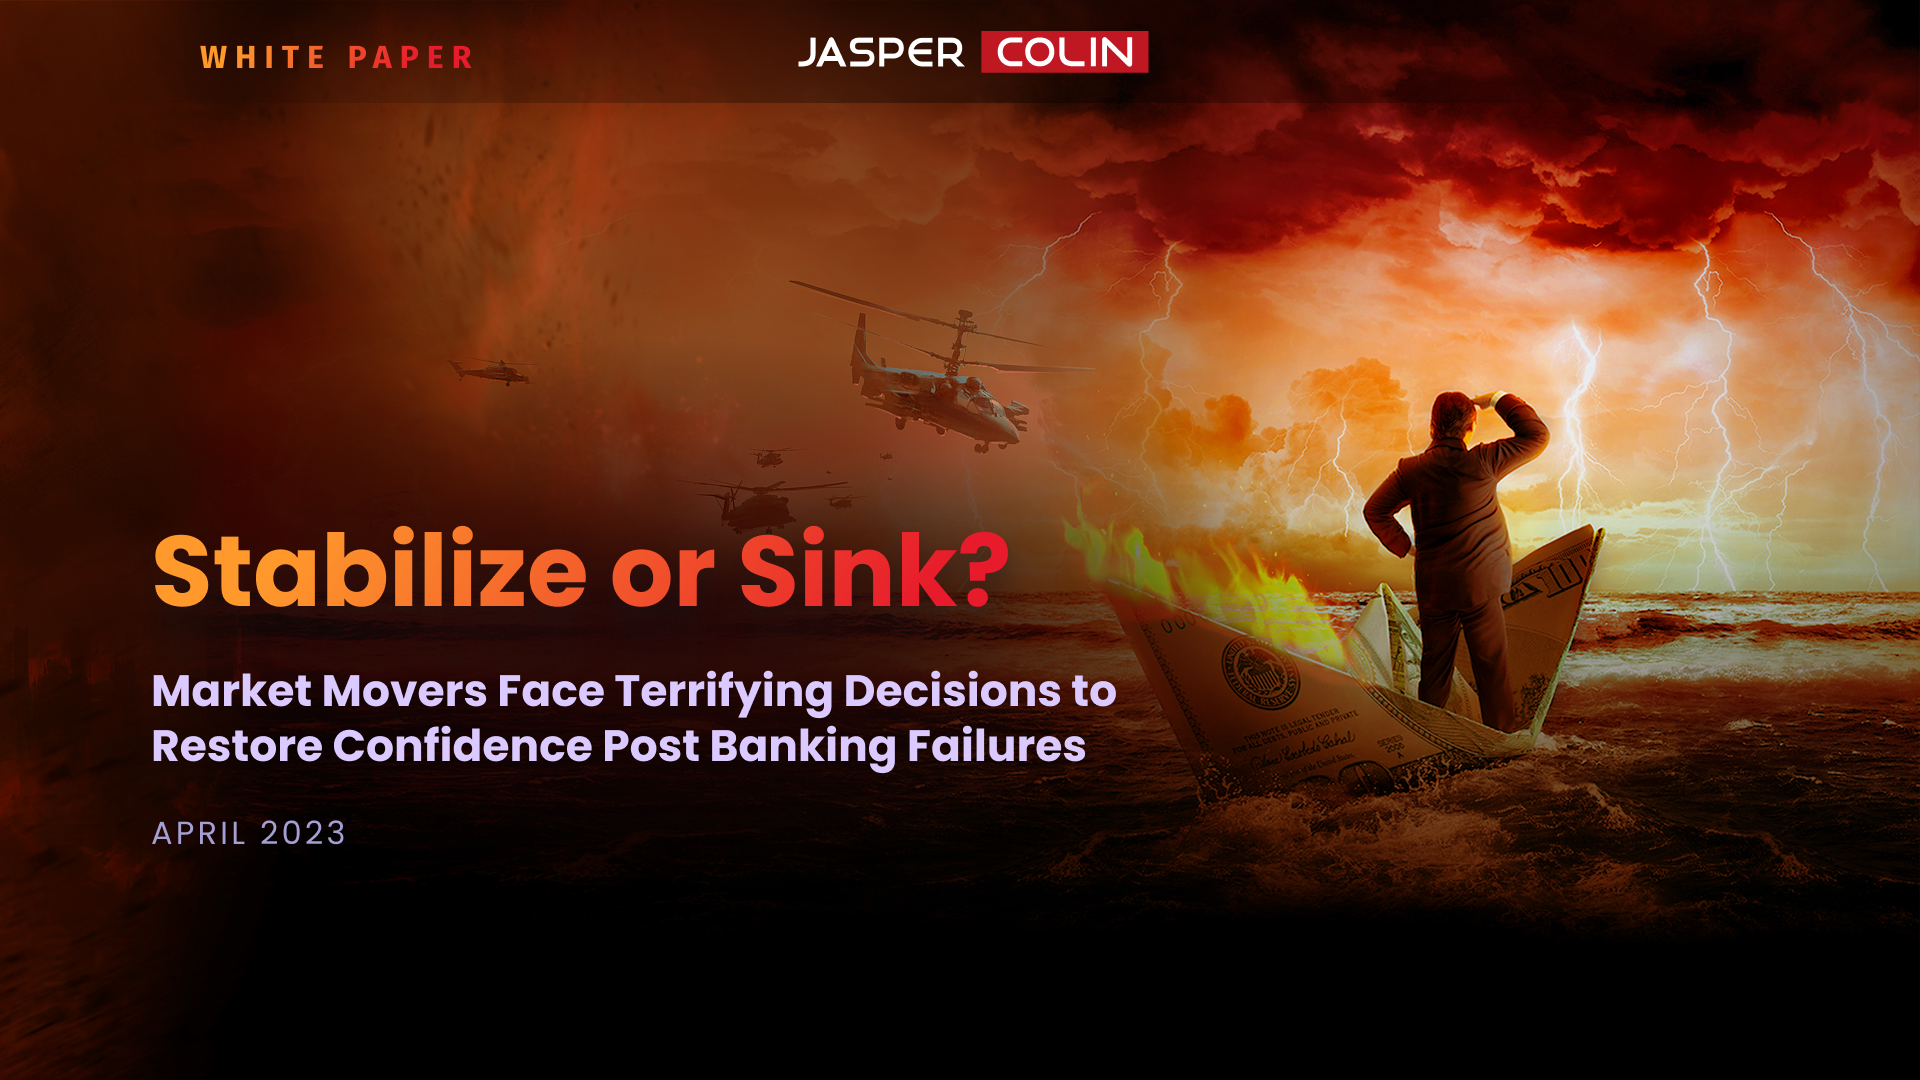 Stabilize or Sink? Jasper Colin's Whitepaper Highlights the Role of Strong Risk Management in the Financial Industry